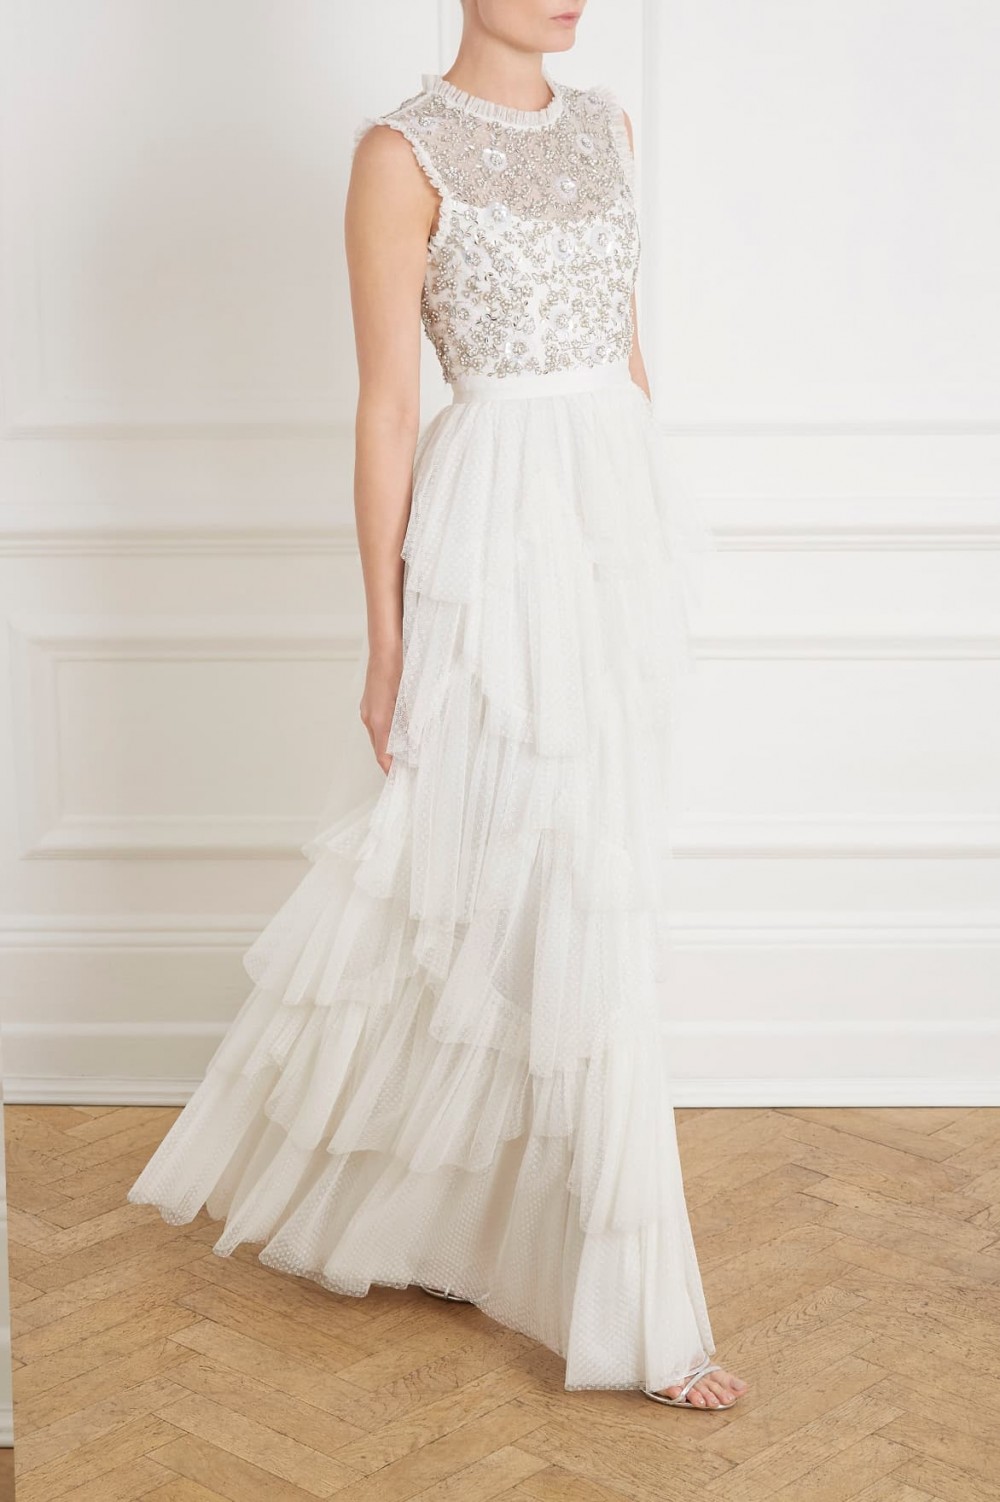 Scallop tiered sleeveless gown